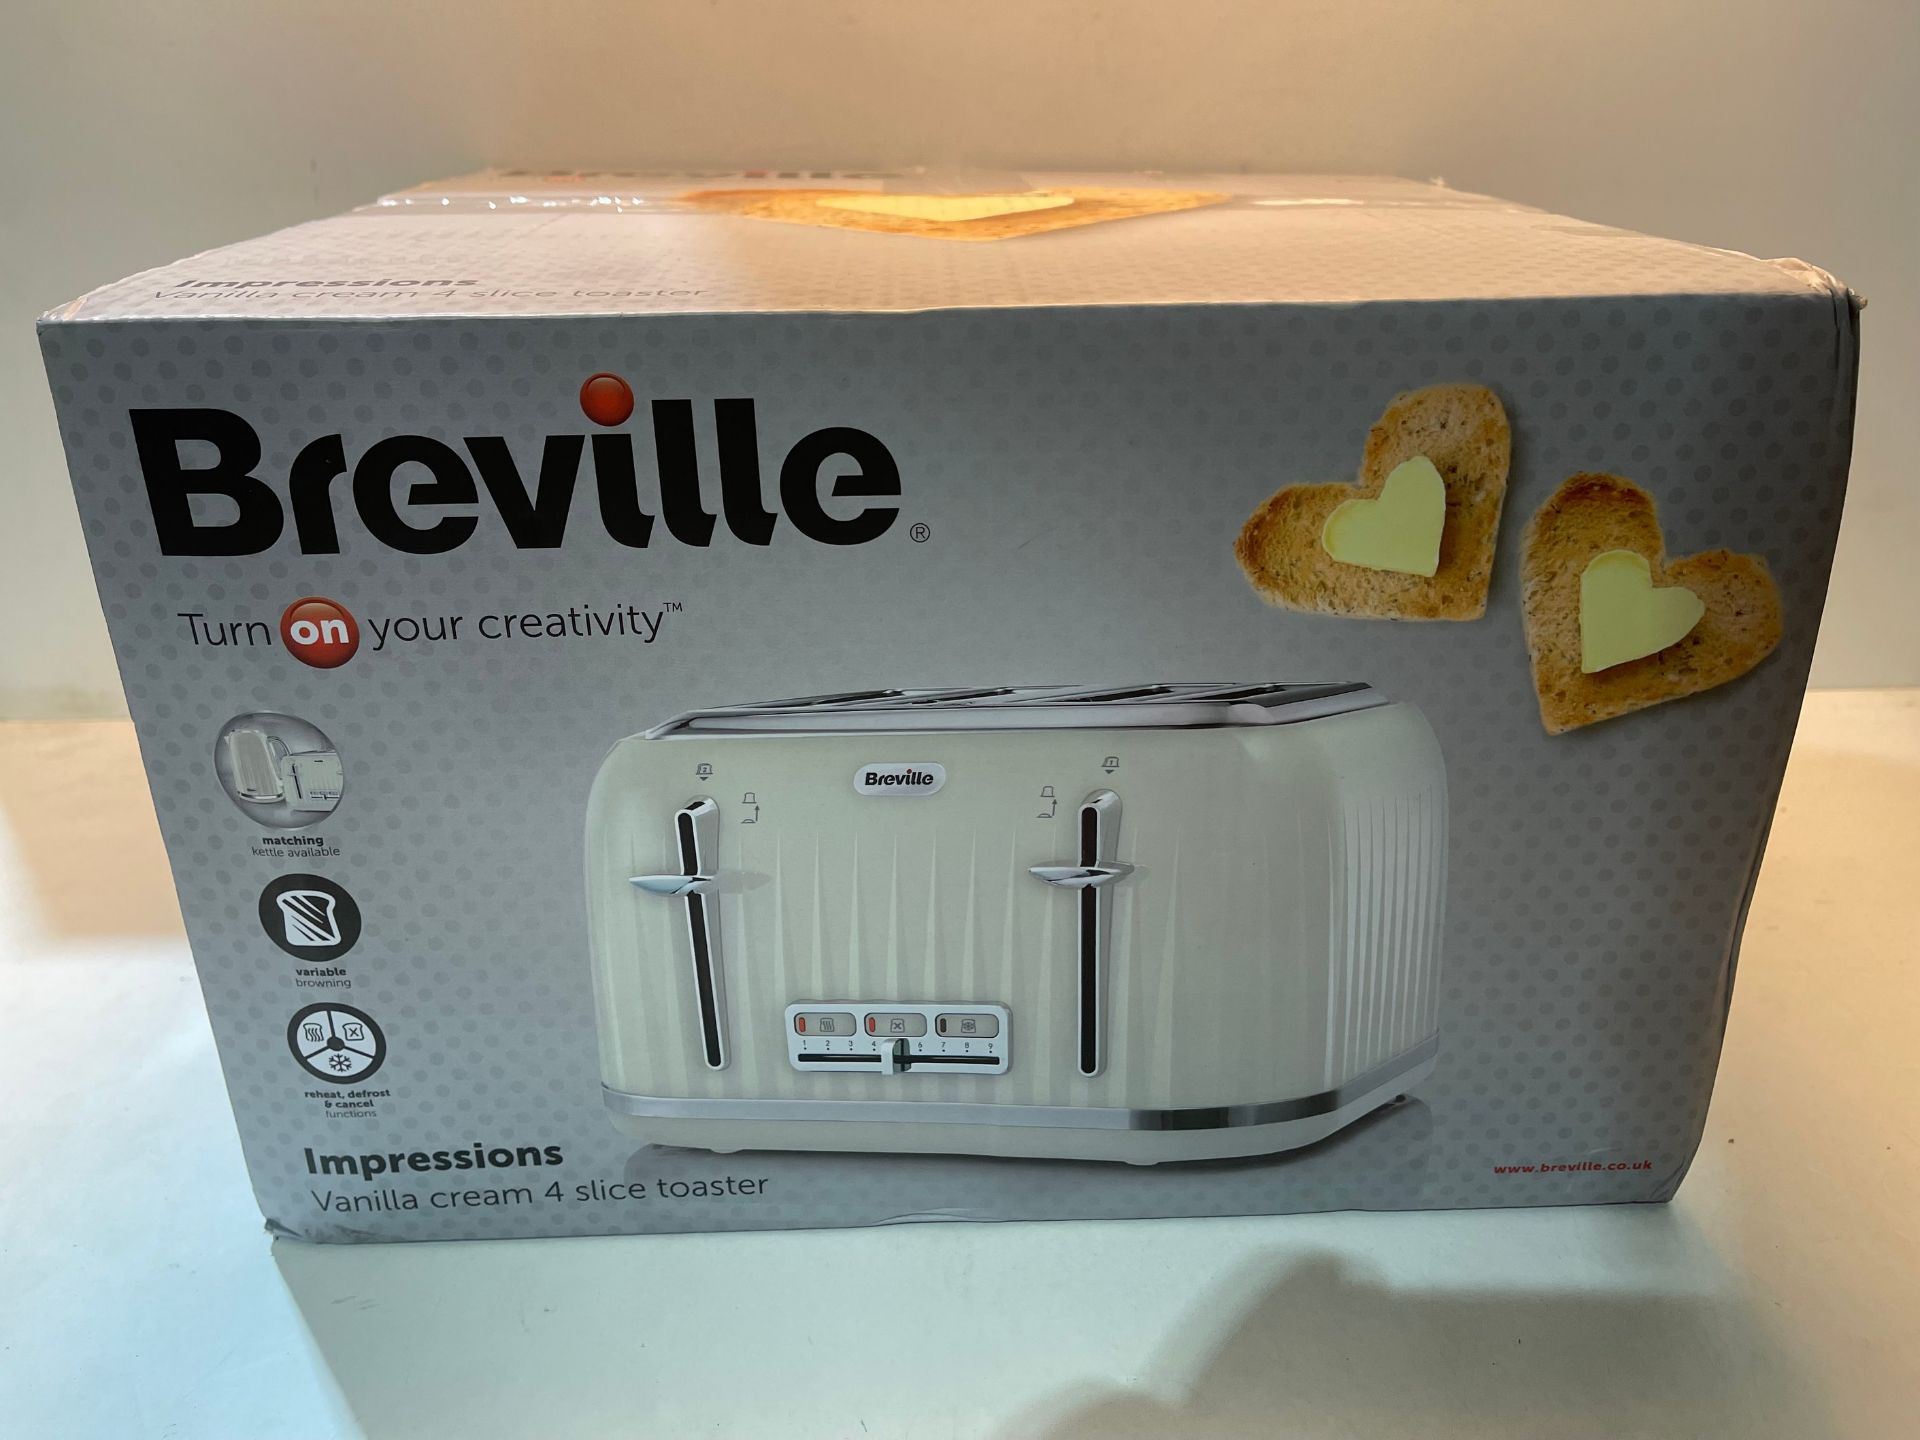 Breville VTT702 Impressions 4-Slice Toaster with High-Lift and Wide Slots, Cream Â£34.99Condition - Image 2 of 2